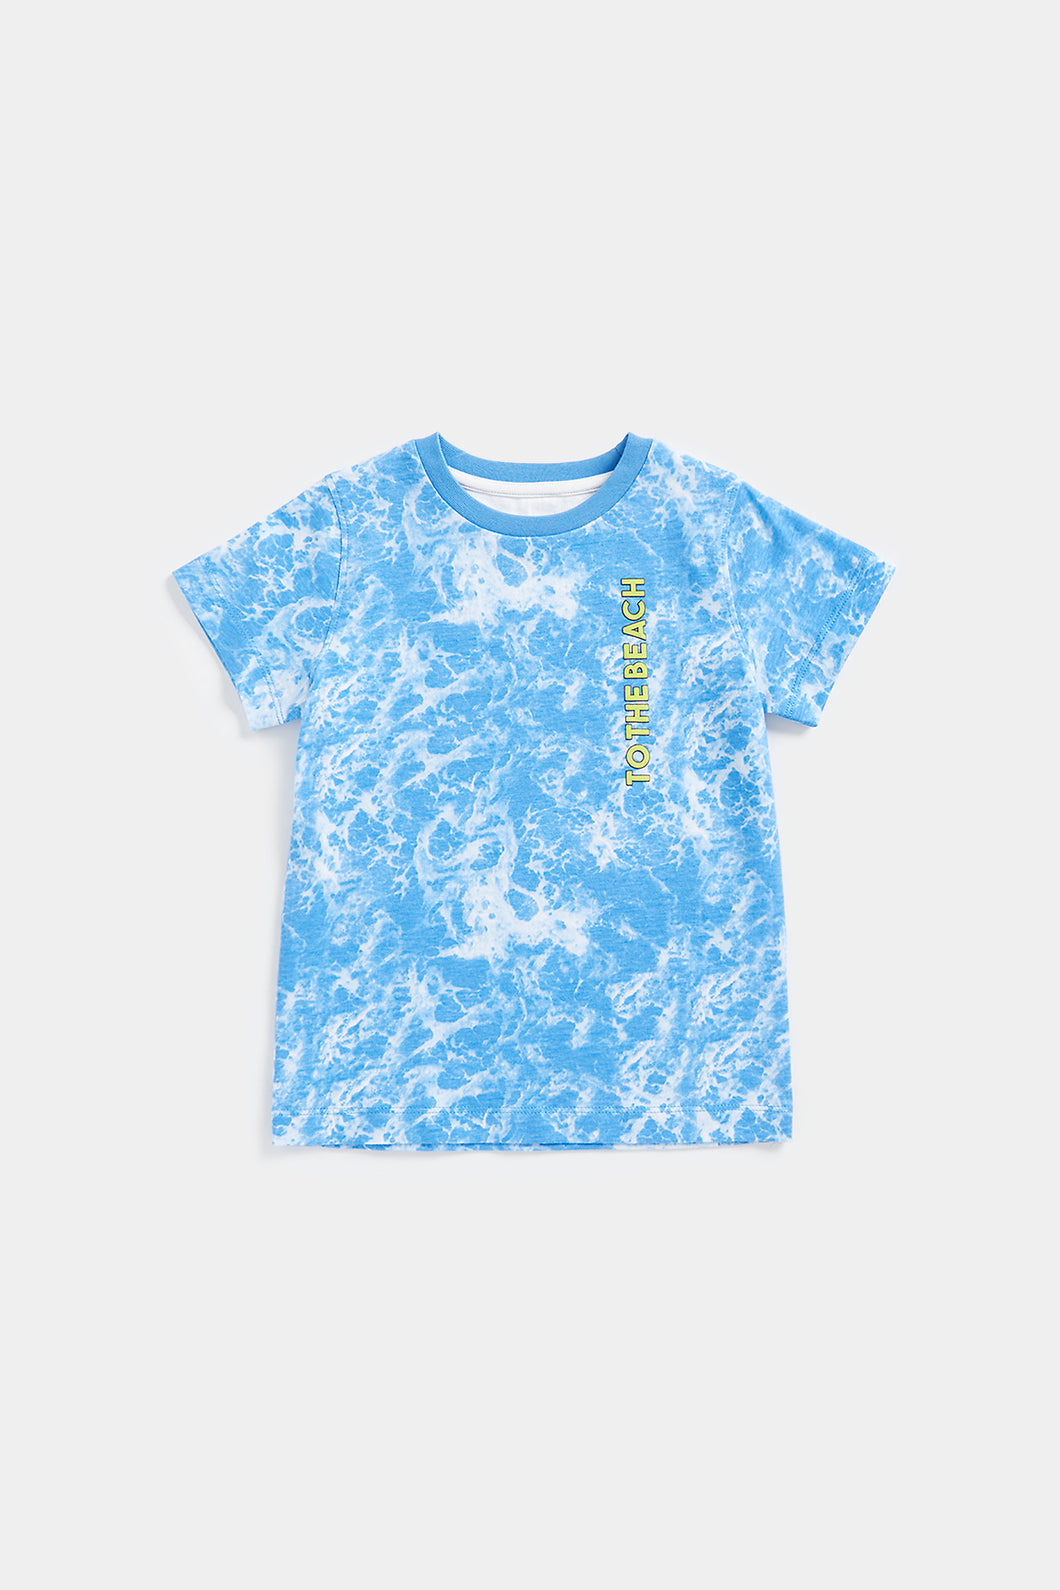 Mothercare To the Beach T-Shirt